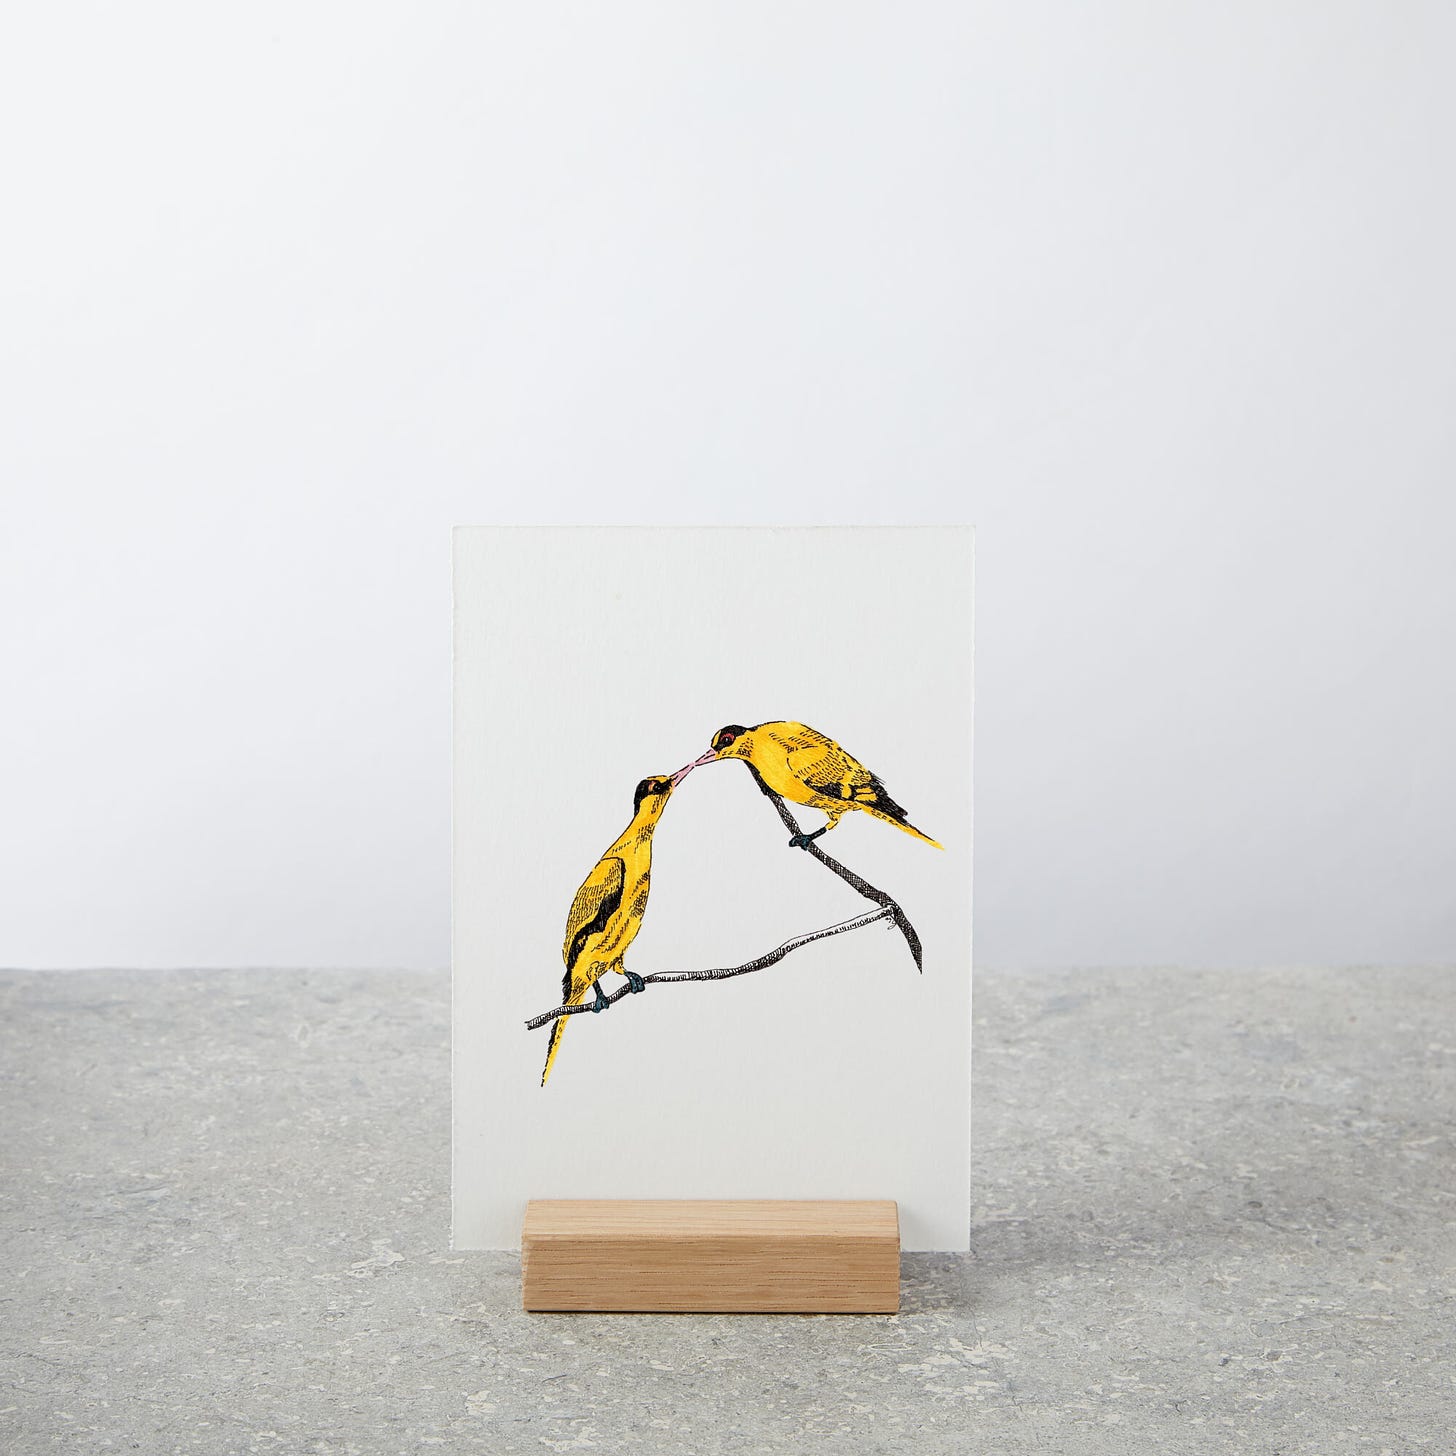 image: photo of a mini art print on a wooden stand. It features my artwork of Commitment, a pair of yellow oriole birds on a single tree branch. Their beaks are touching each other.